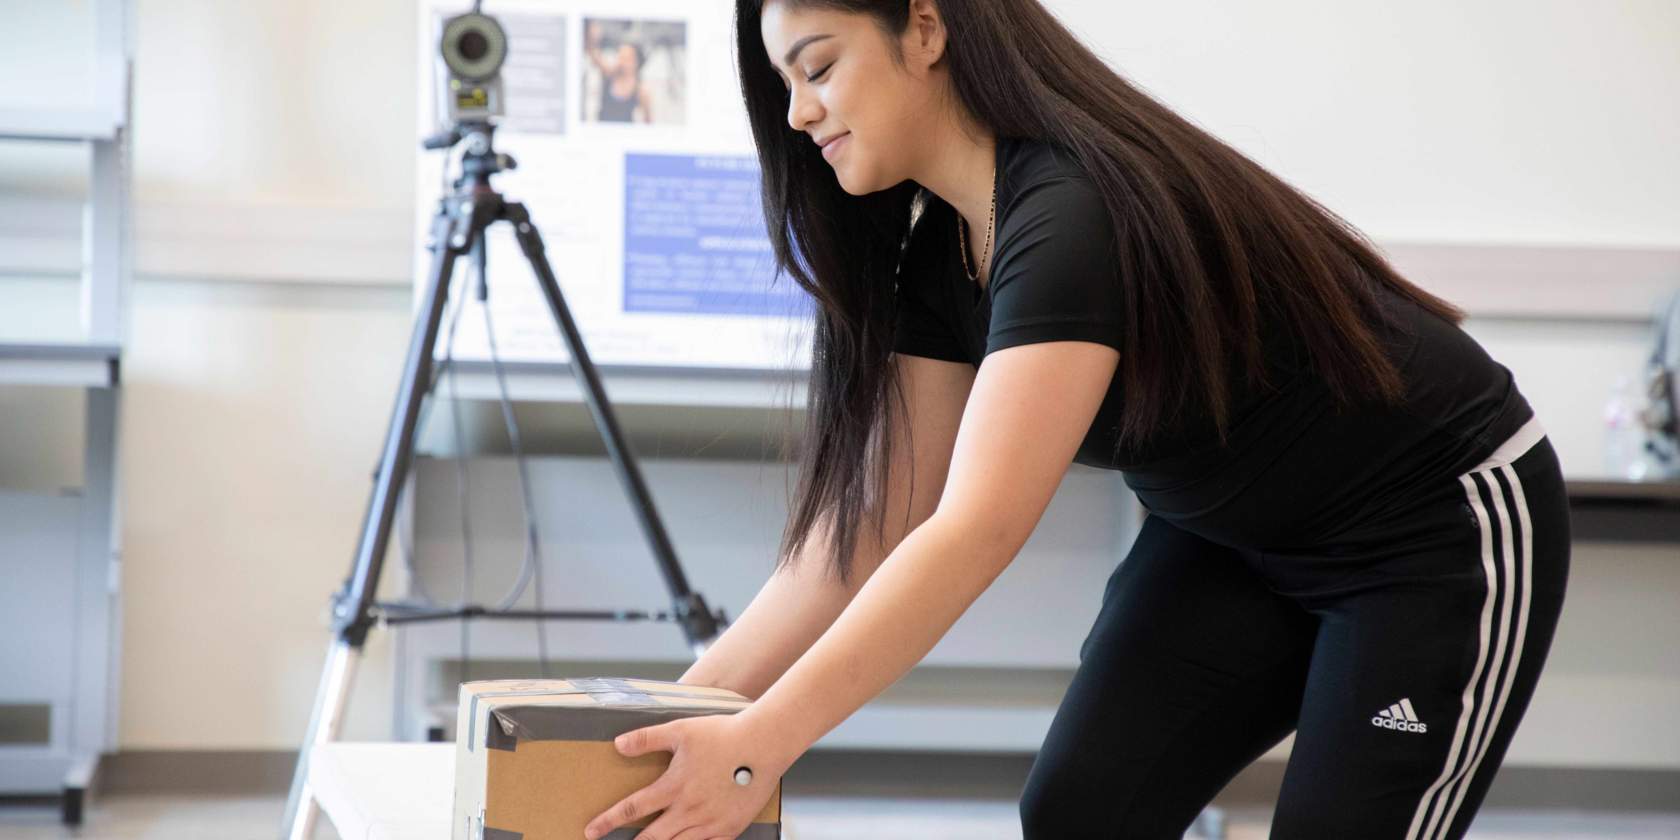 Student picking up a box with sensor on her hand